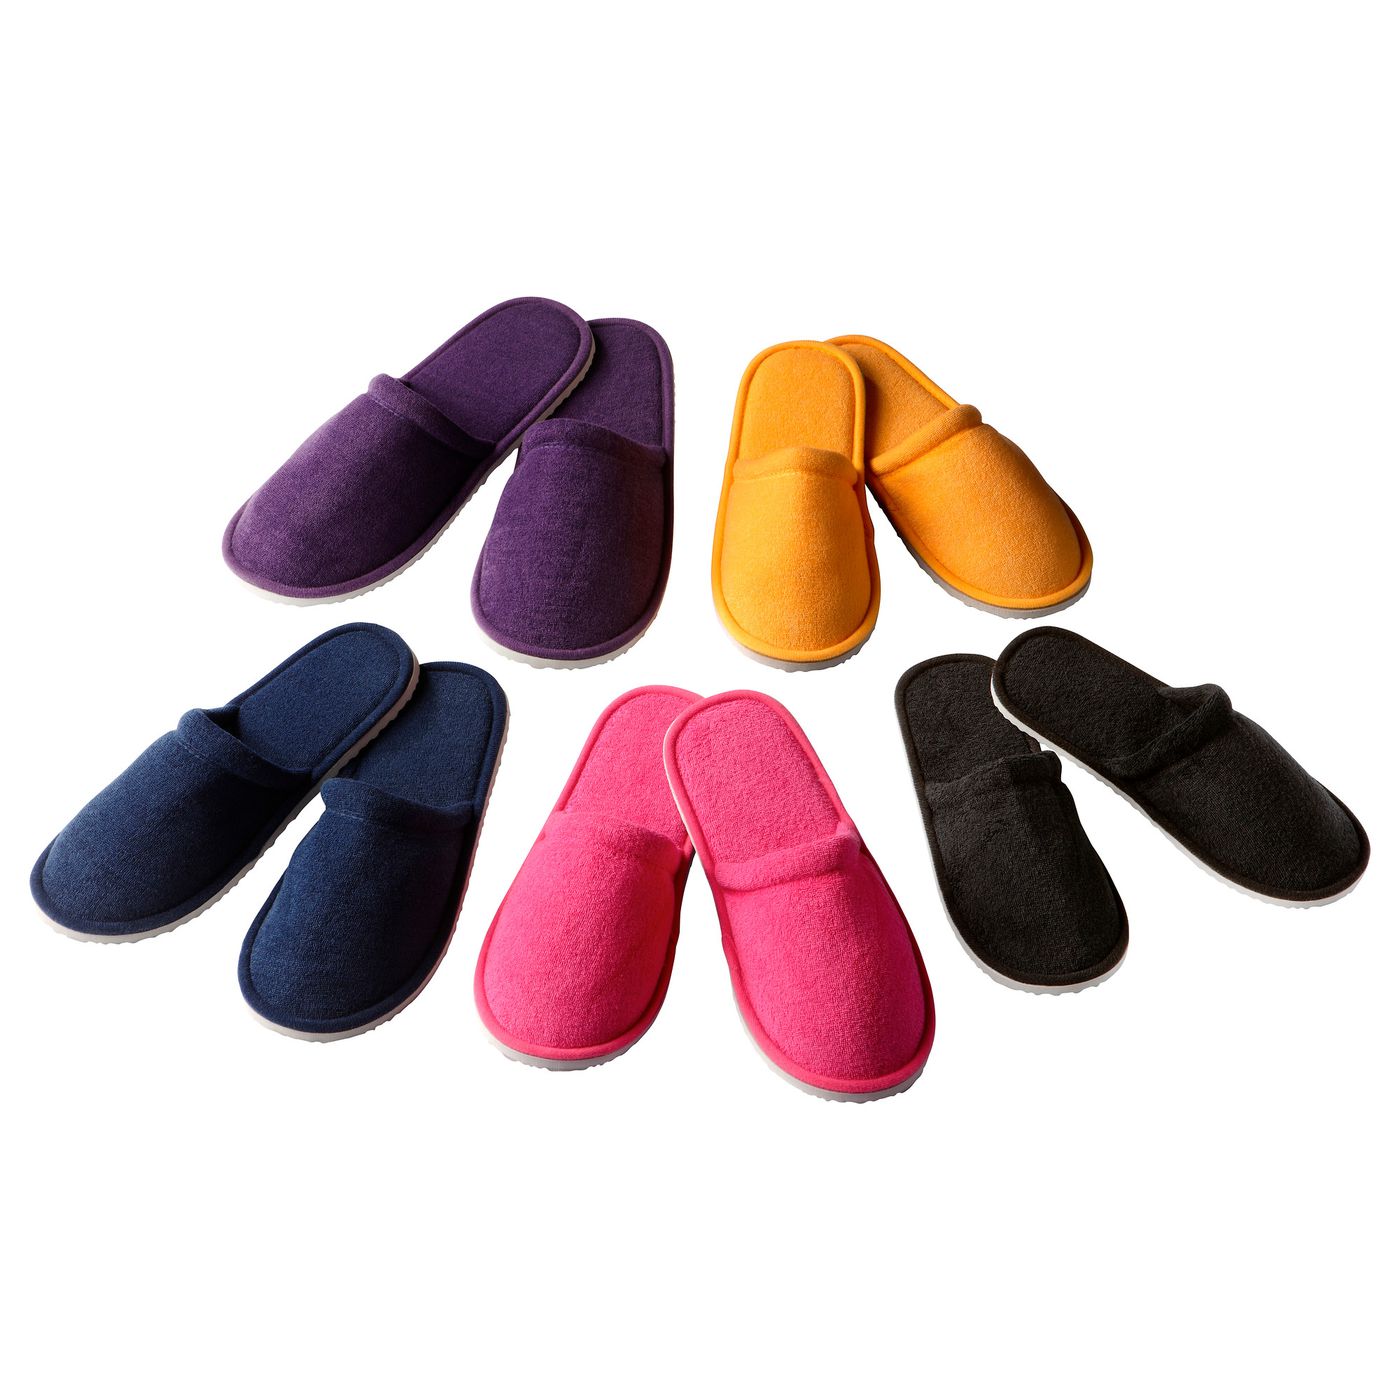 New IKEA assorted color slipper S/M or L/XL 